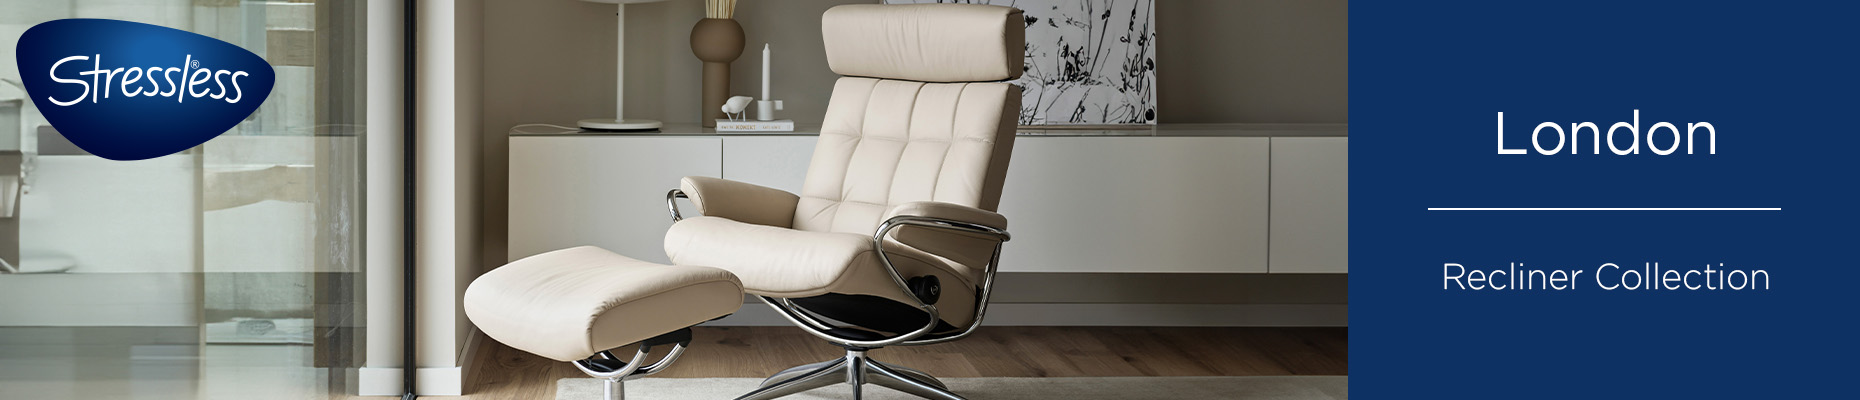 London Recliner Collection at Forrest Furnishing